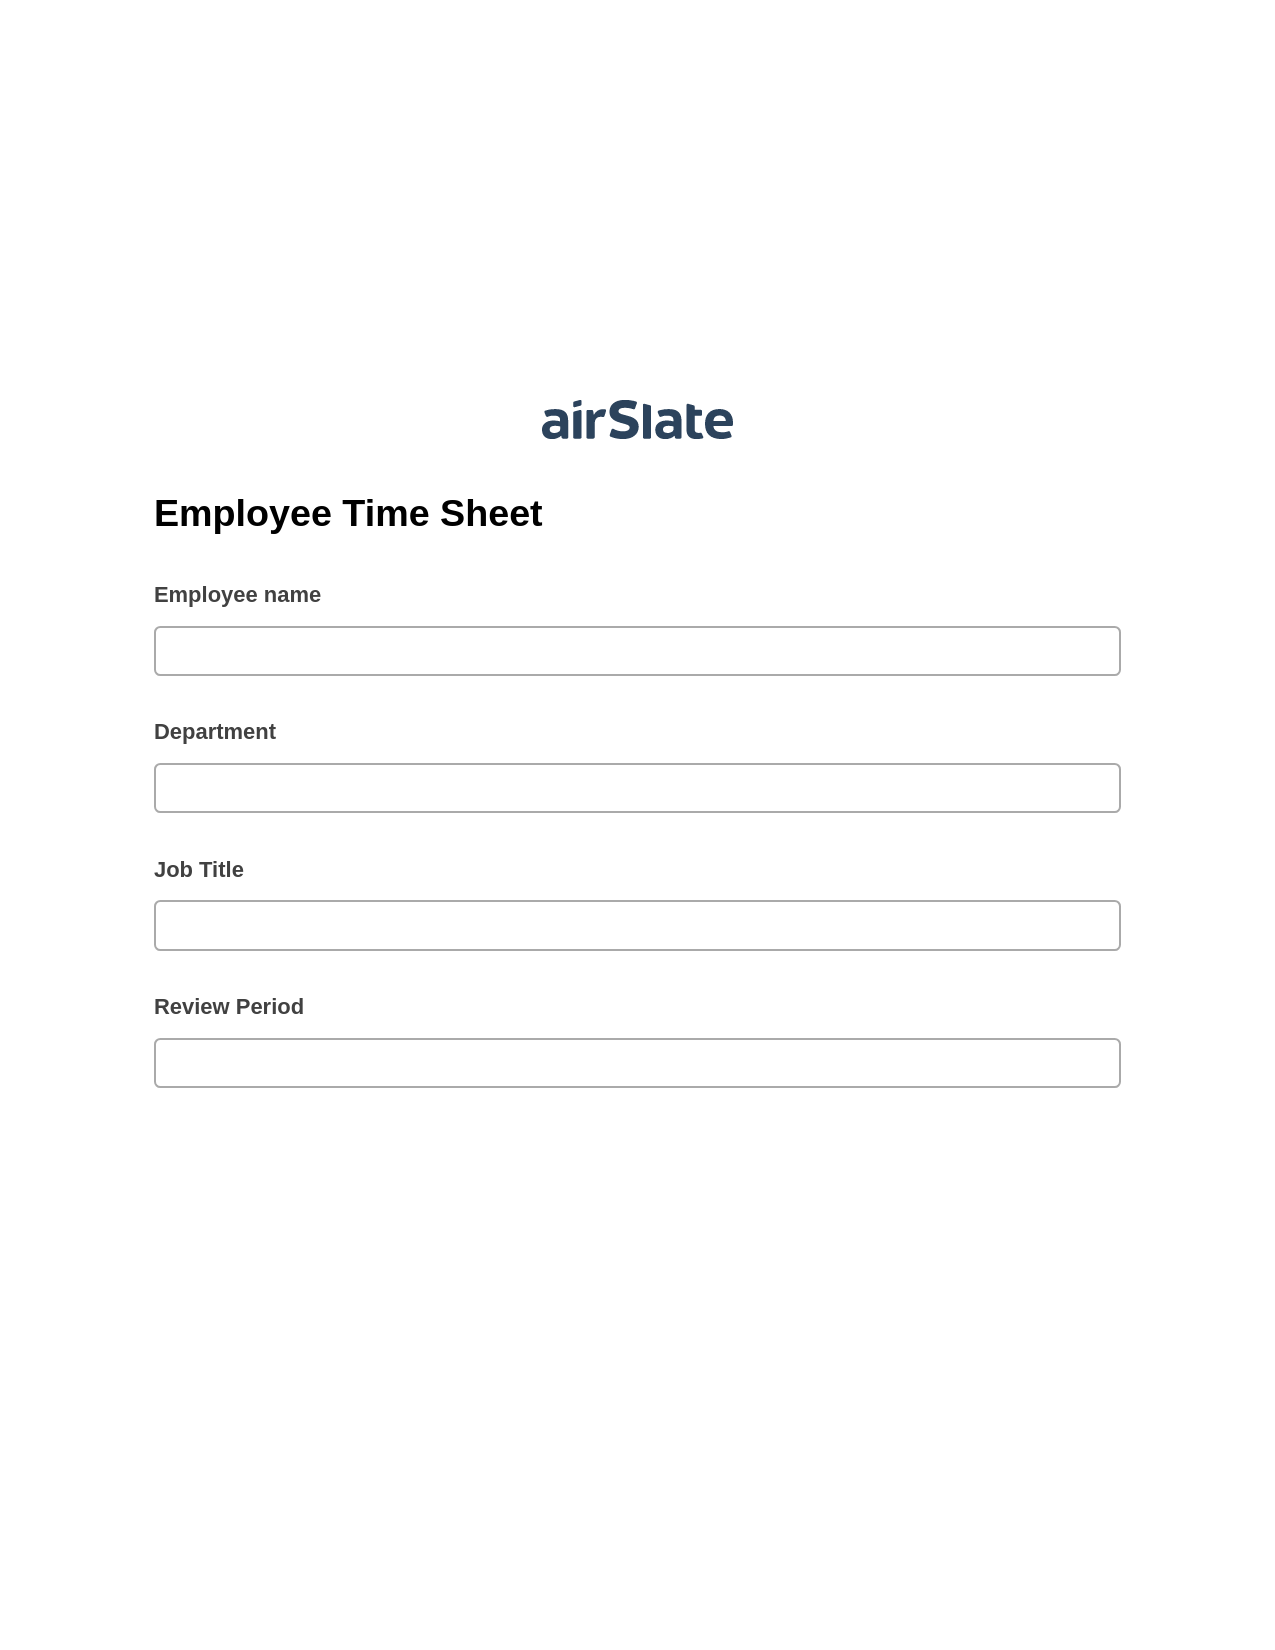 Multirole Employee Time Sheet Pre-fill from Office 365 Excel Bot, Send Mailchimp Campaign Bot, Export to Excel 365 Bot